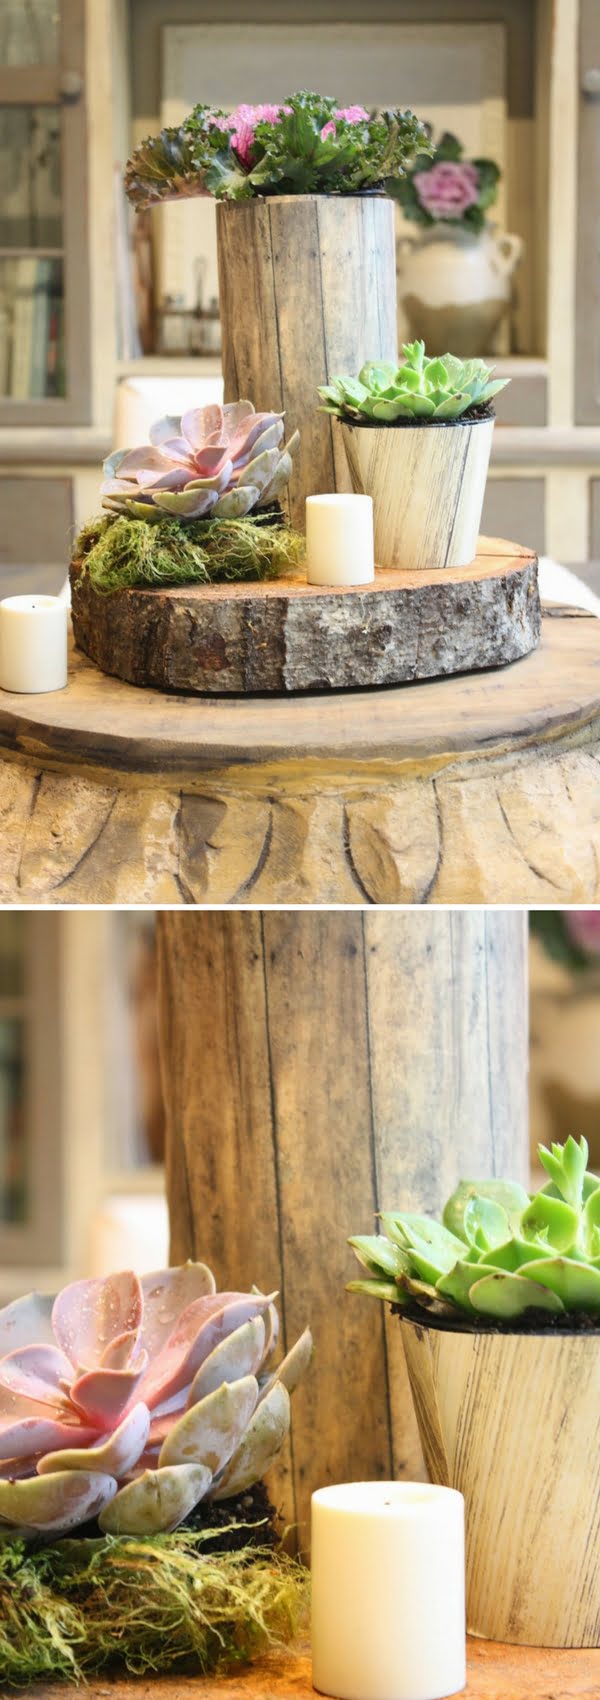 How to make a DIY rustic tree stump centerpiece 